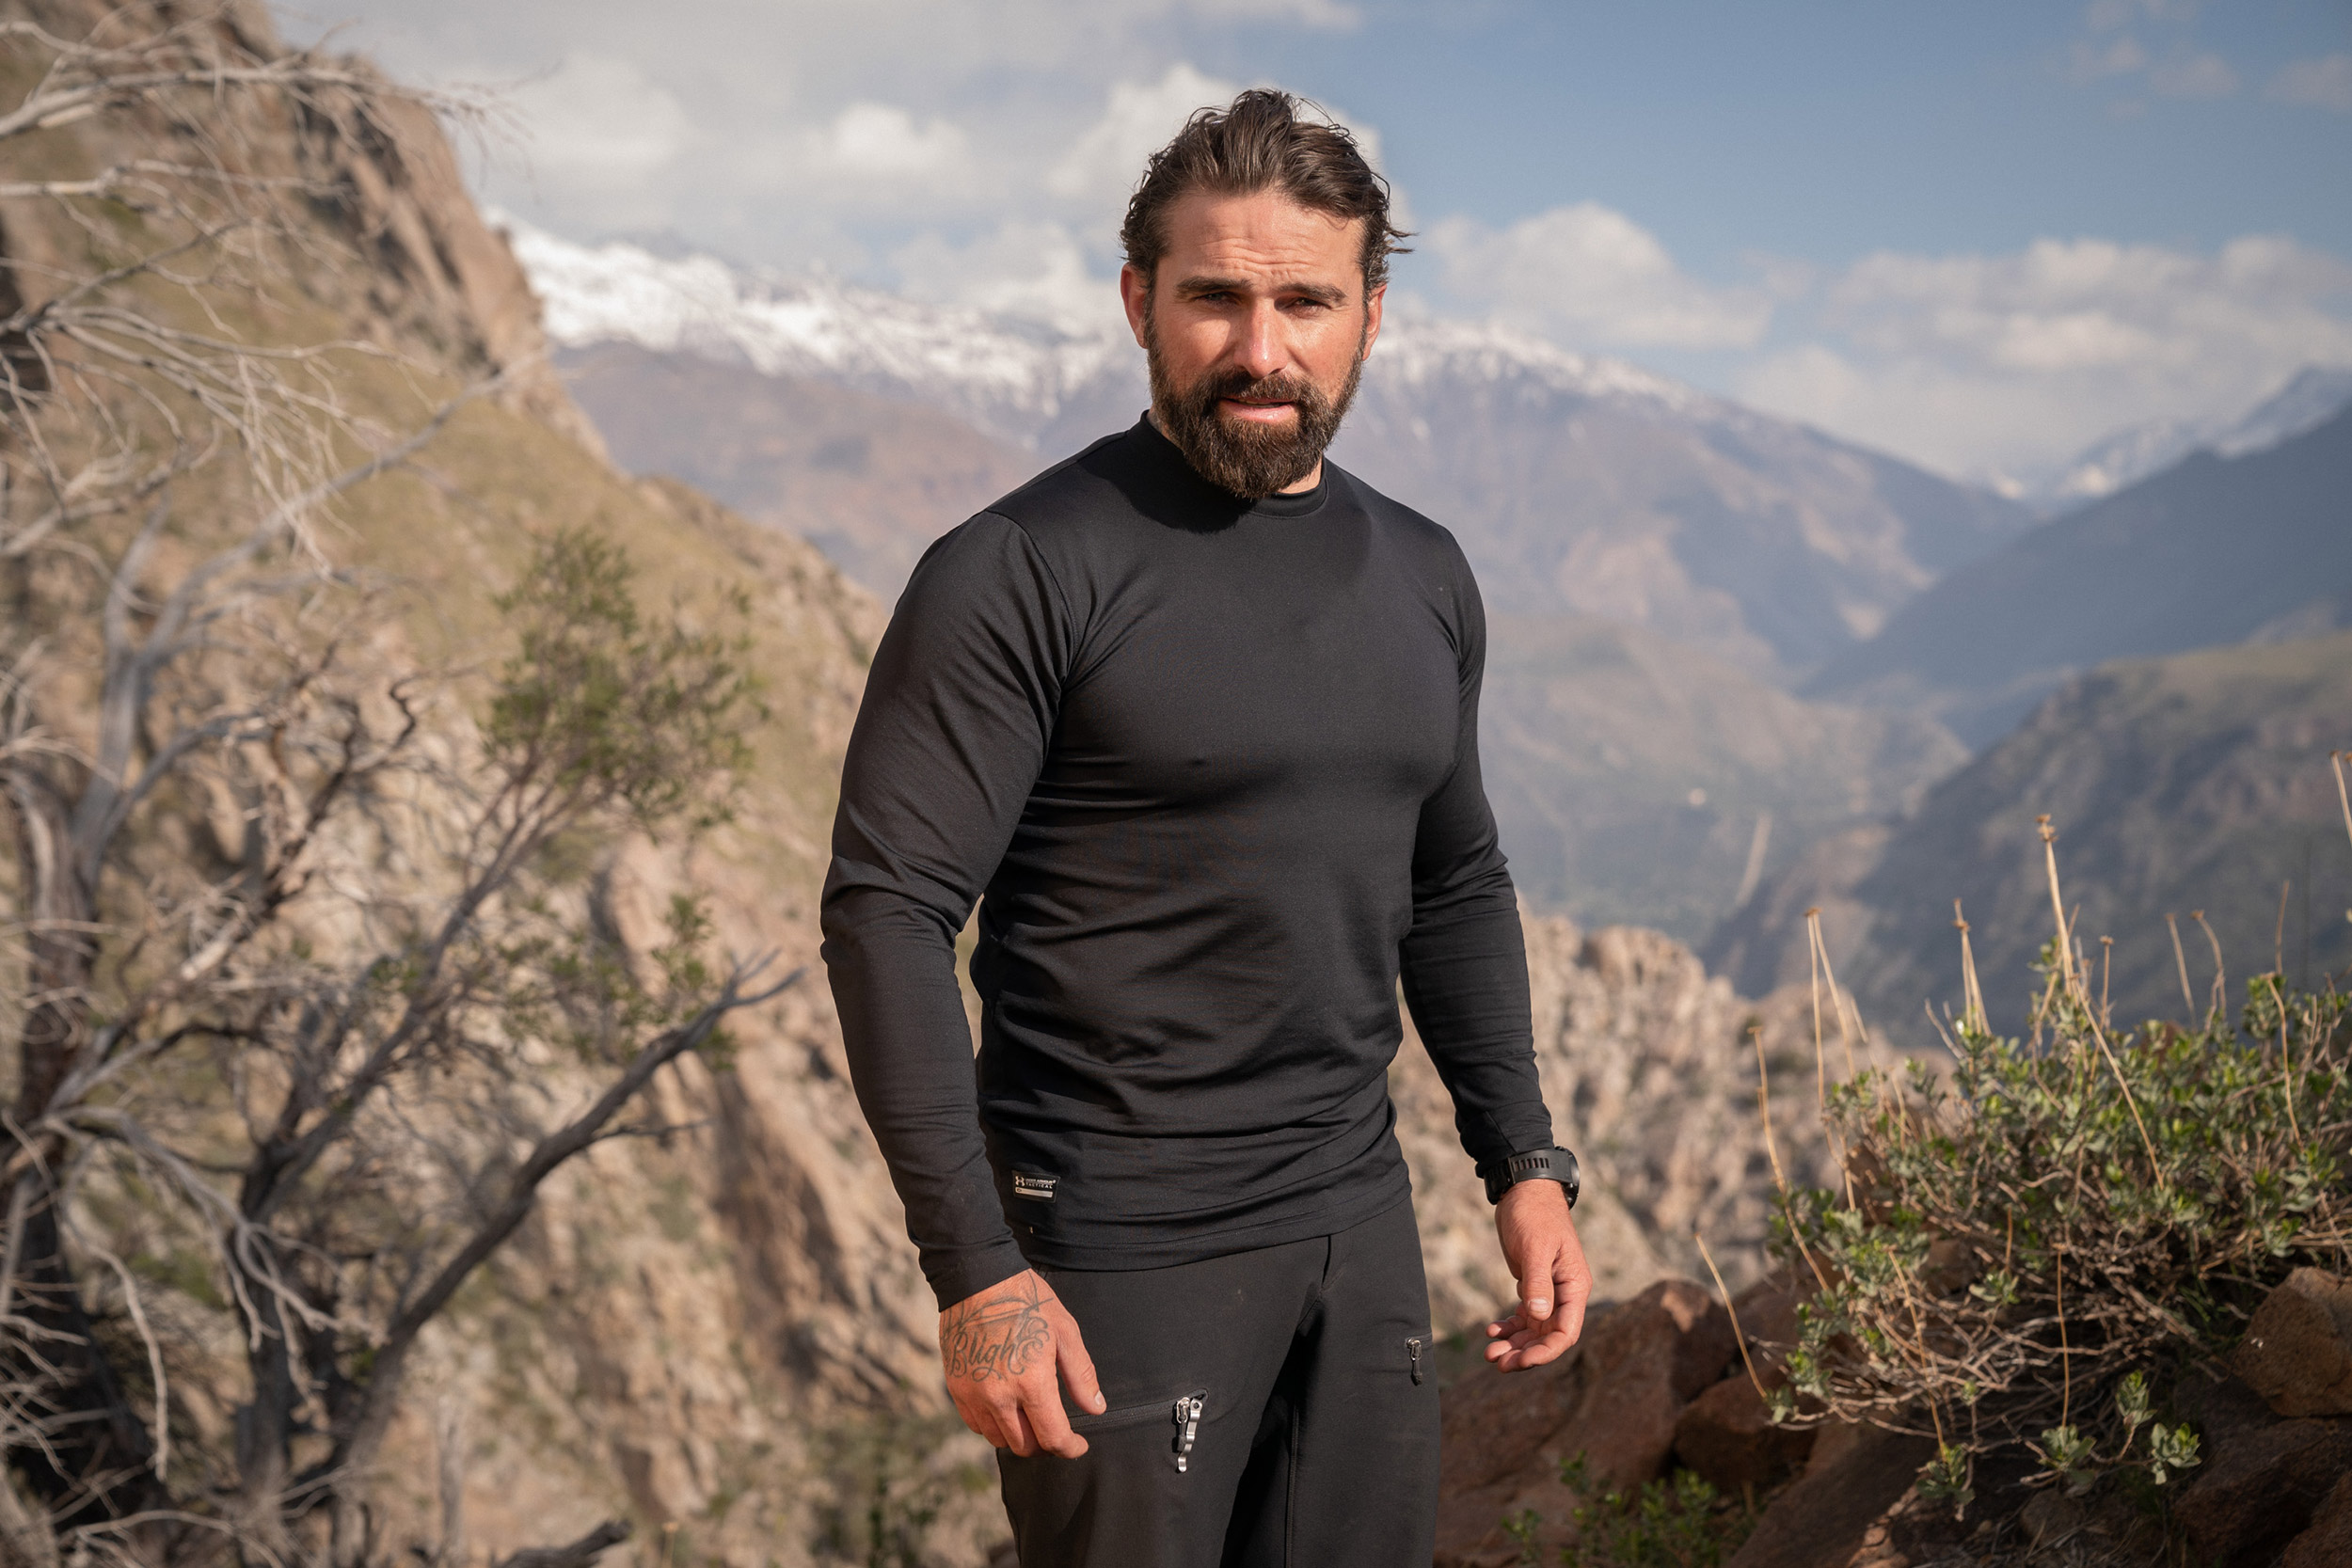  Chief Instructor Ant Middleton  Minnow Films / Channel 4 